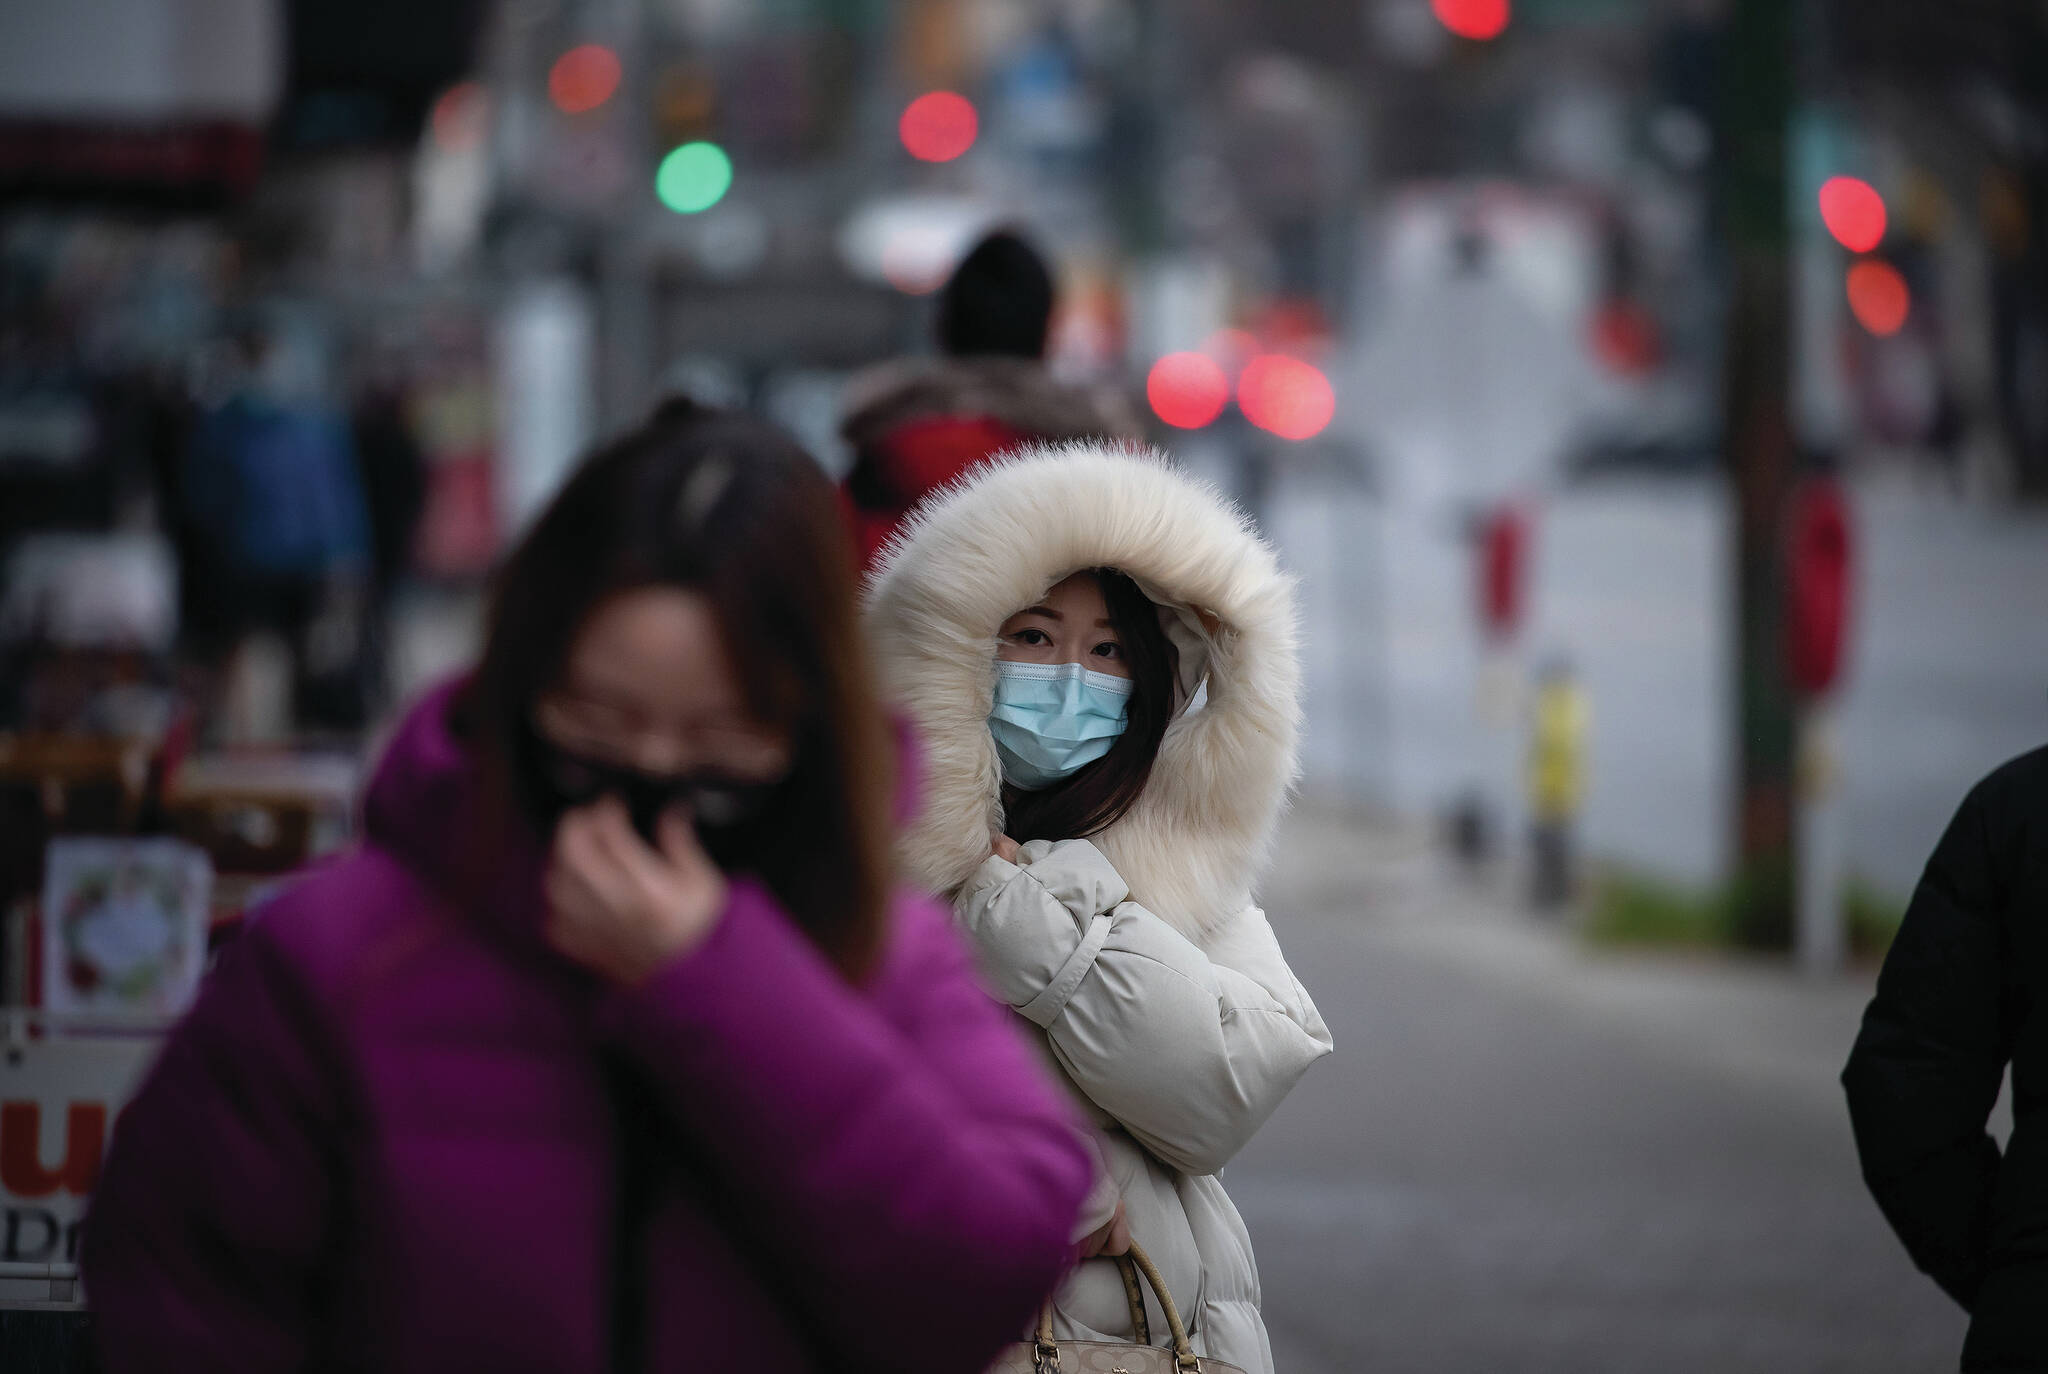 A person bundled up in a heavy jacket for the cold weather wears a face mask to curb the spread of COVID-19 in Vancouver, on Tuesday, December 21, 2021. THE CANADIAN PRESS/Darryl Dyck